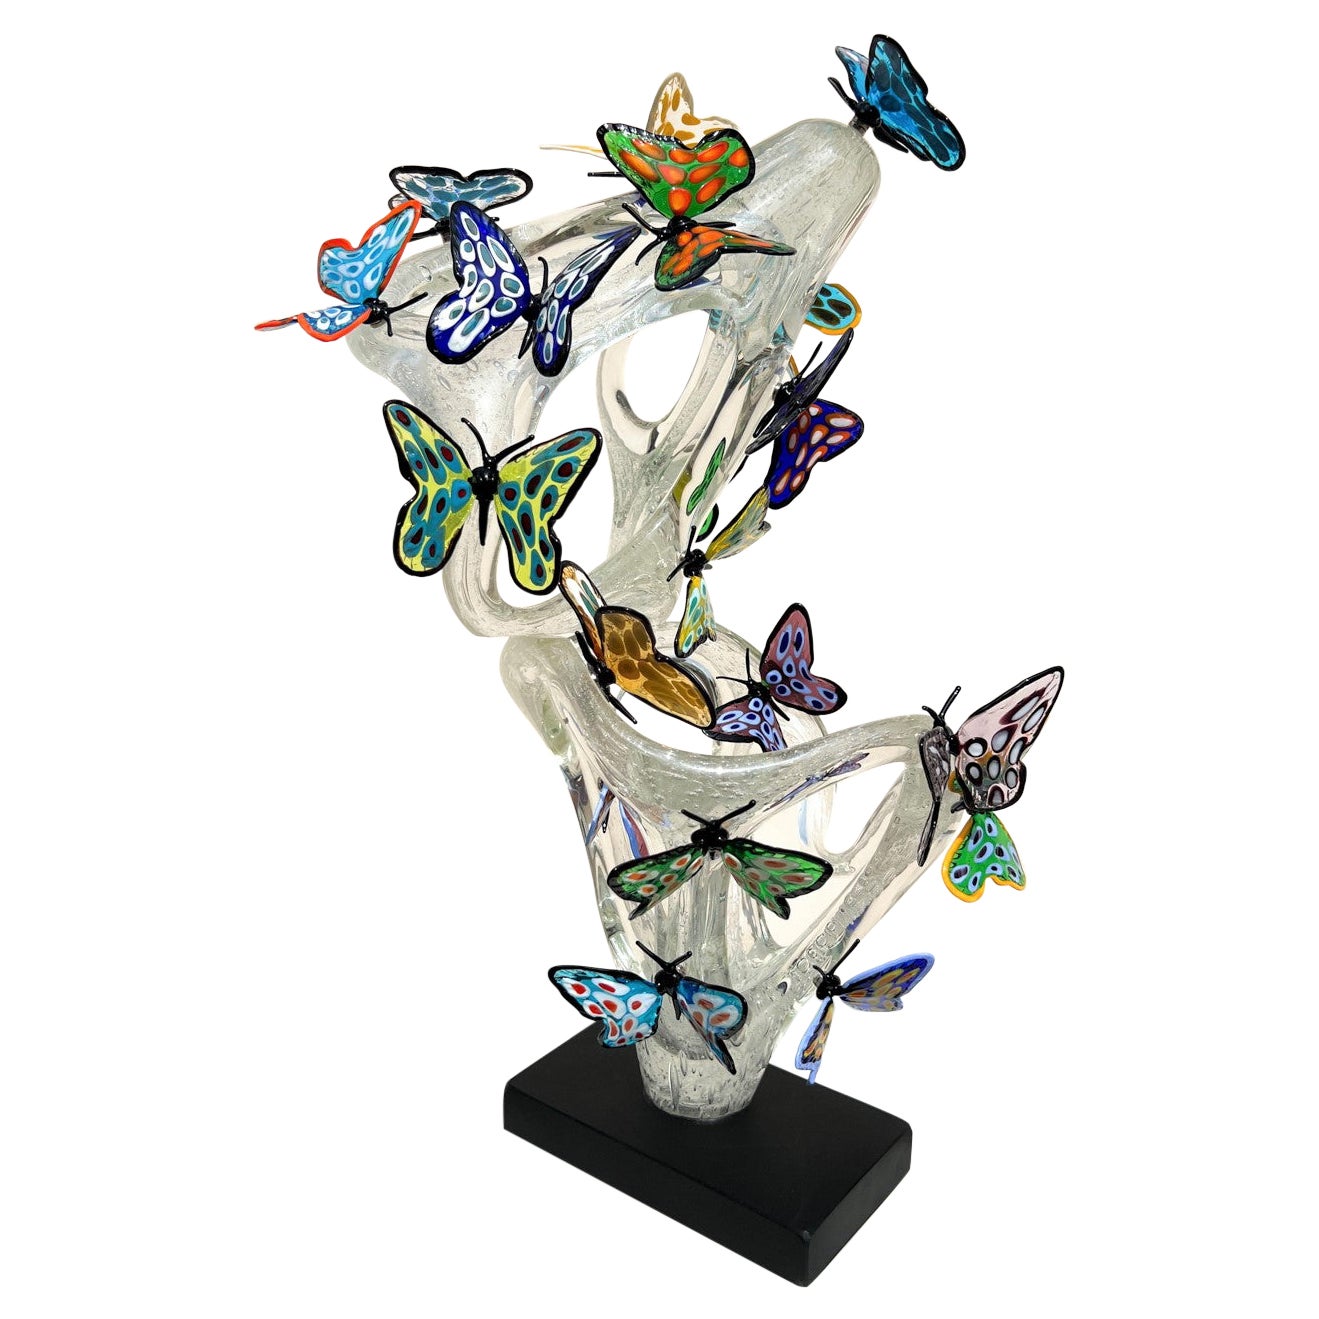 Costantini Diego Modern Crystal Murano Glass Infinity Sculpture With Butterflies